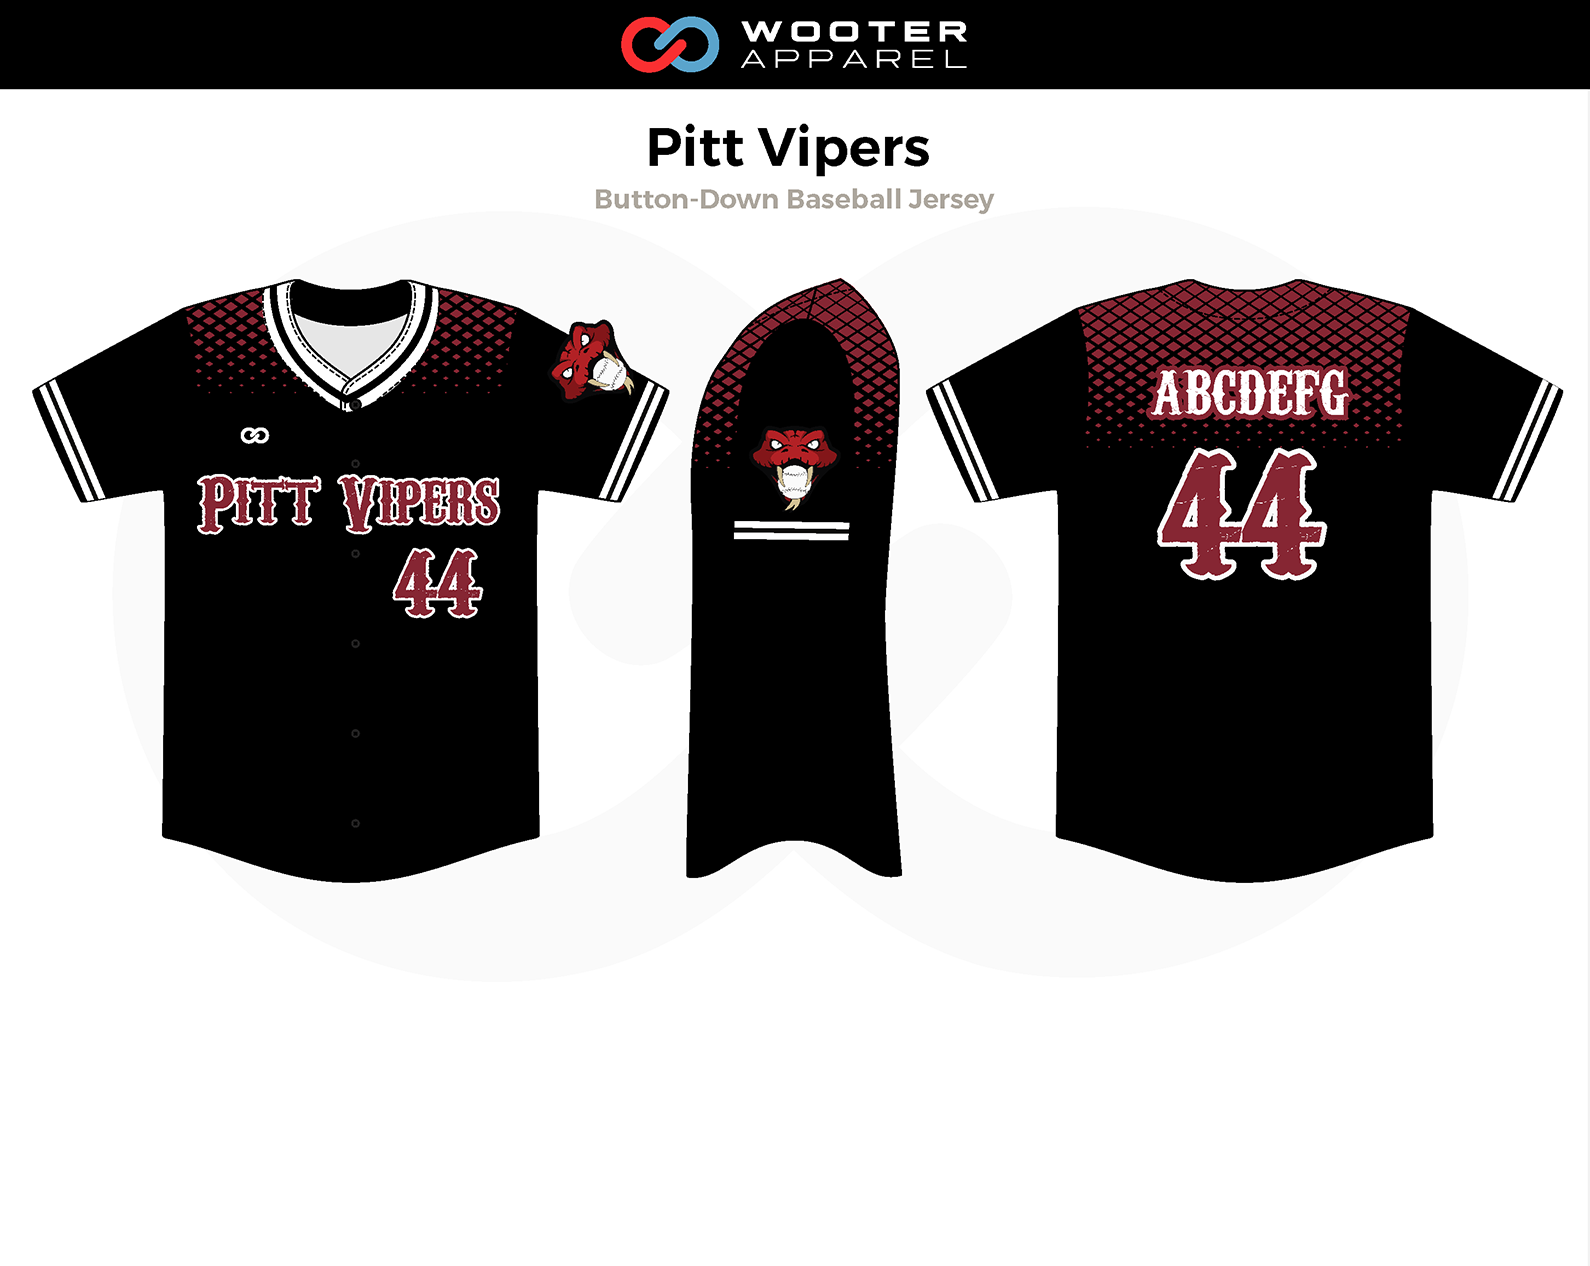 pitt vipers_Page_4.png